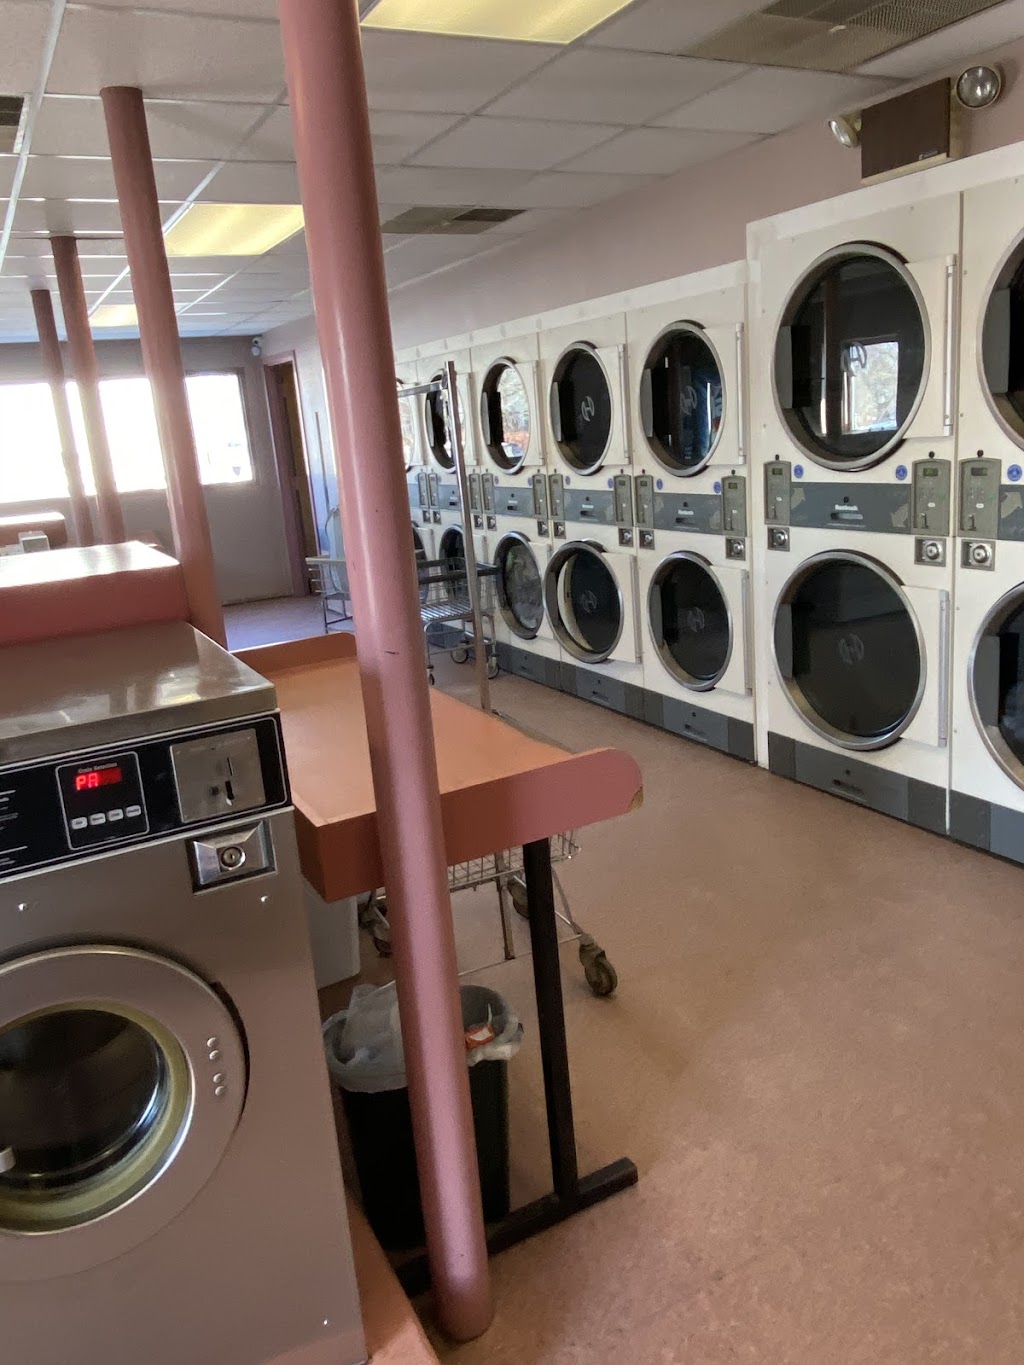 Schmookys Laundromat & Dry Cleaners | 120 Main St N, Trumbauersville, PA 18970 | Phone: (215) 536-9948